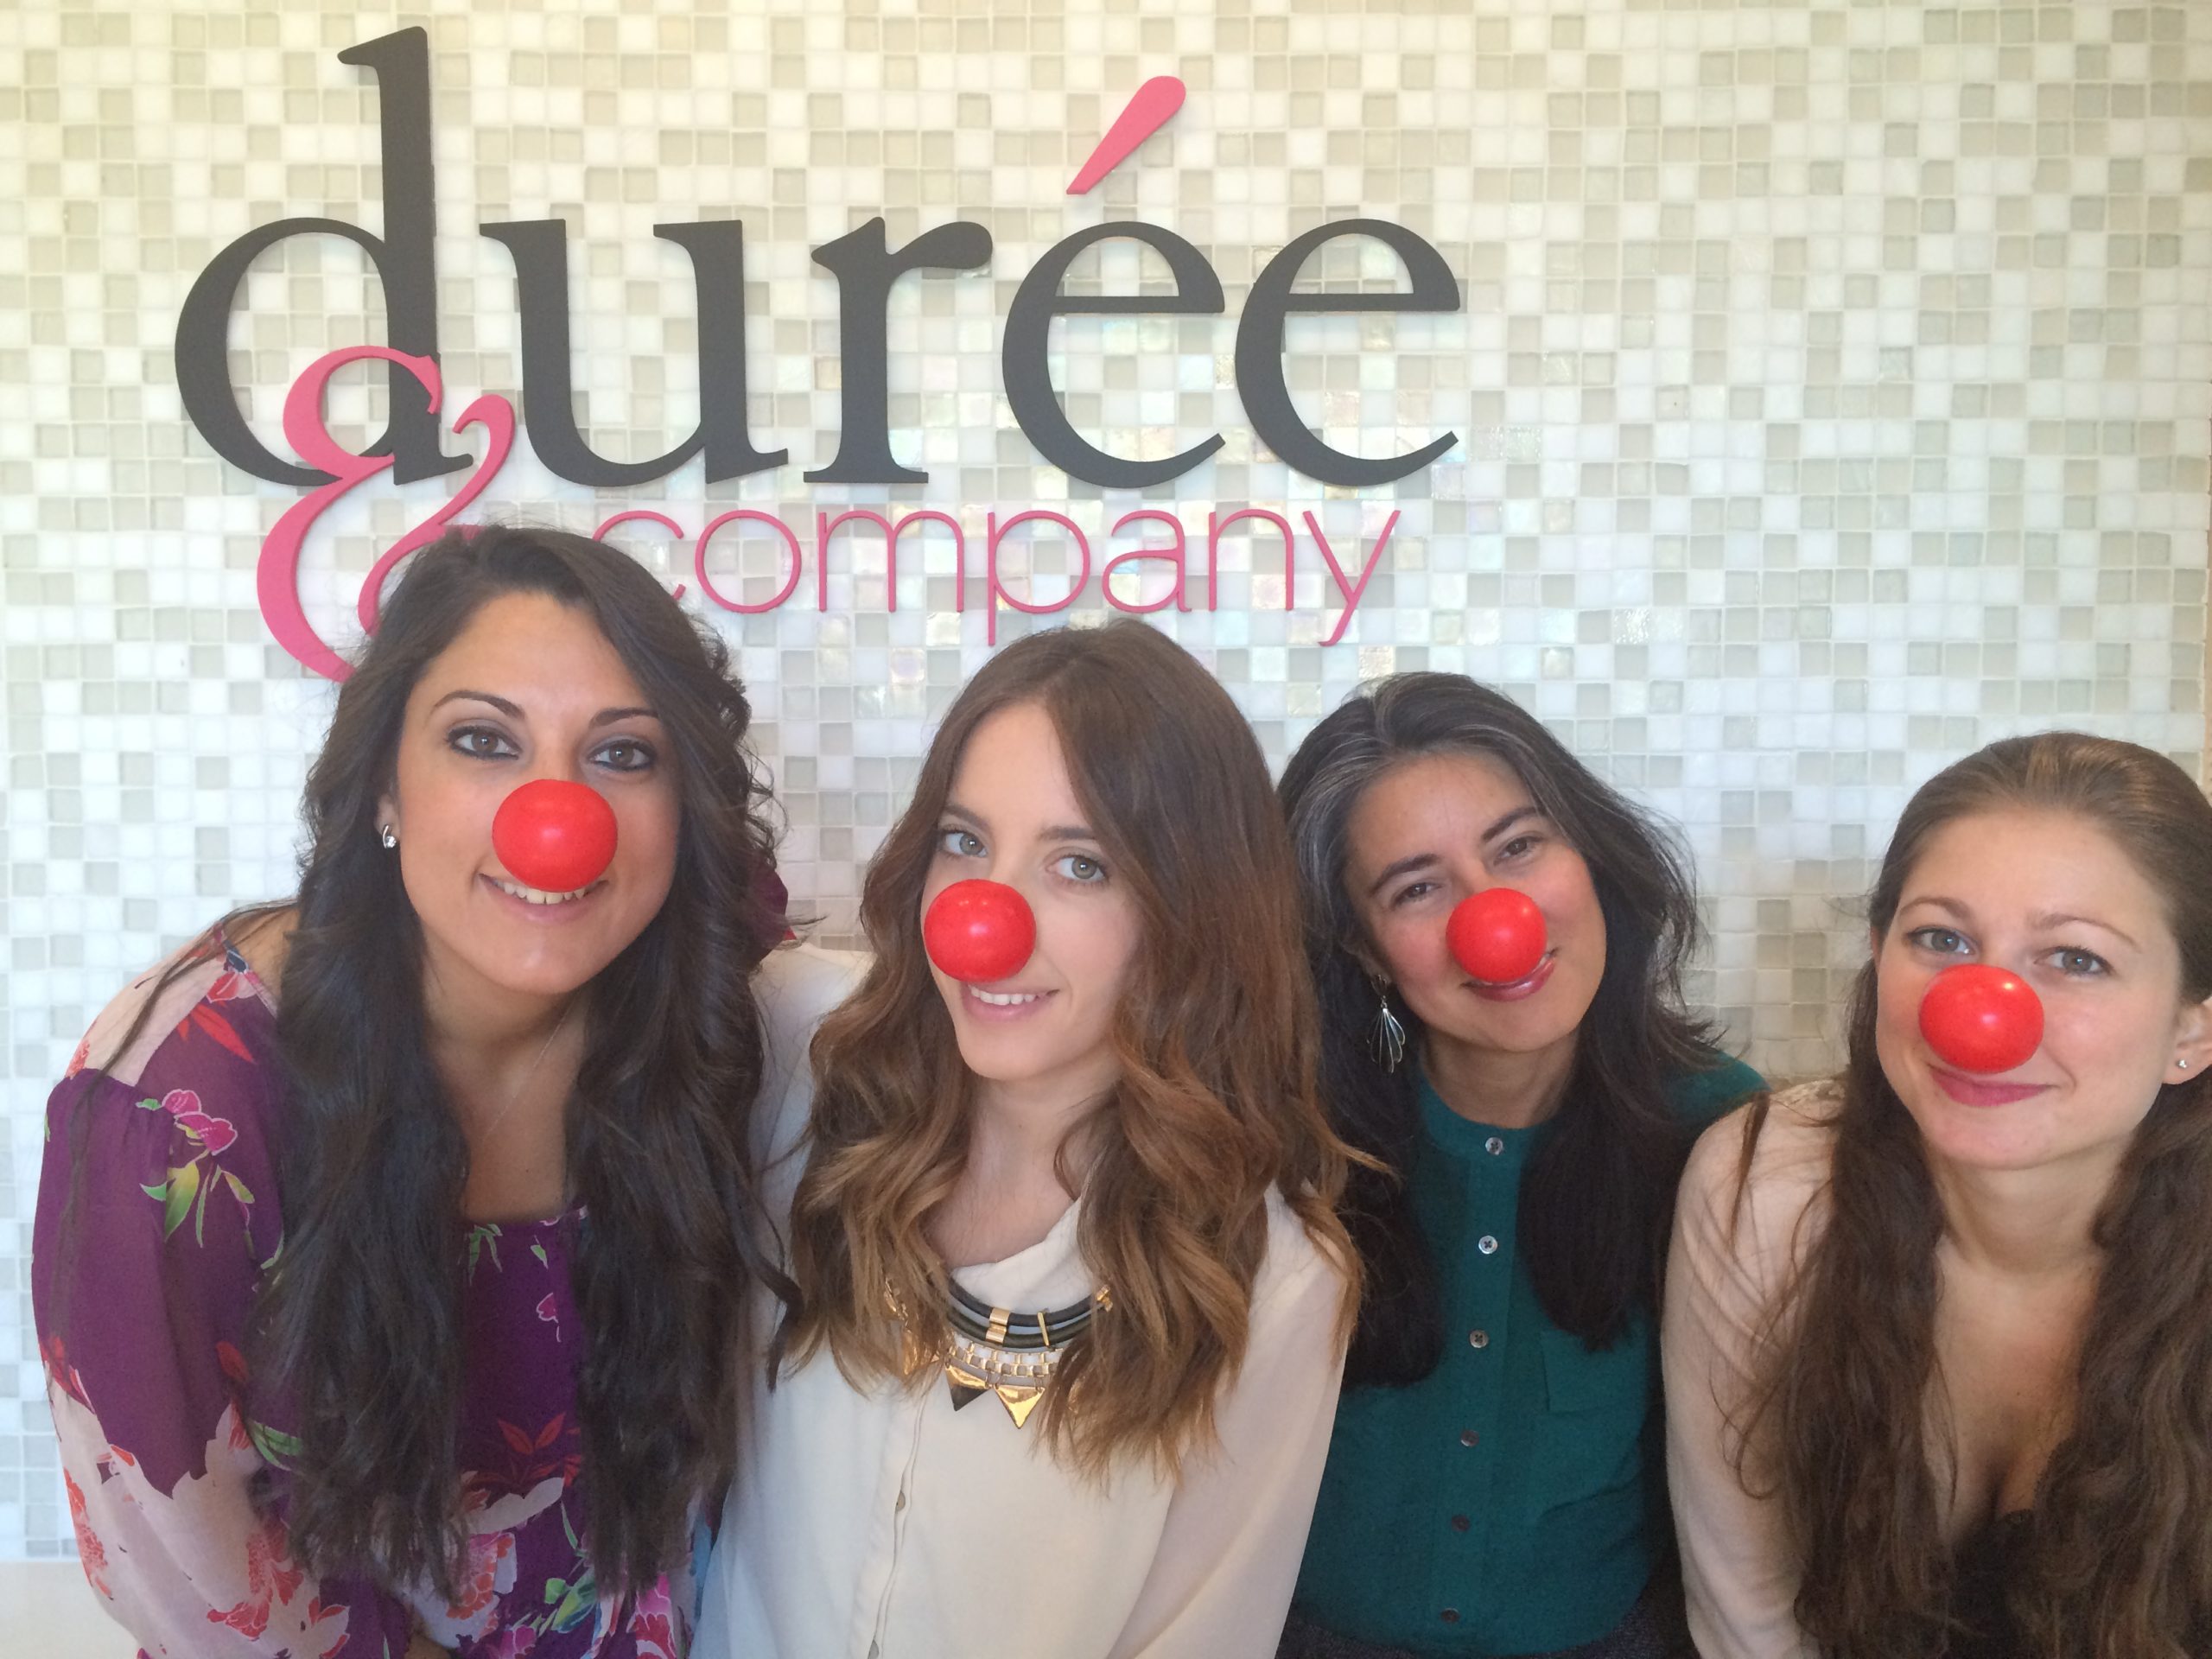 Durée and company red nose day